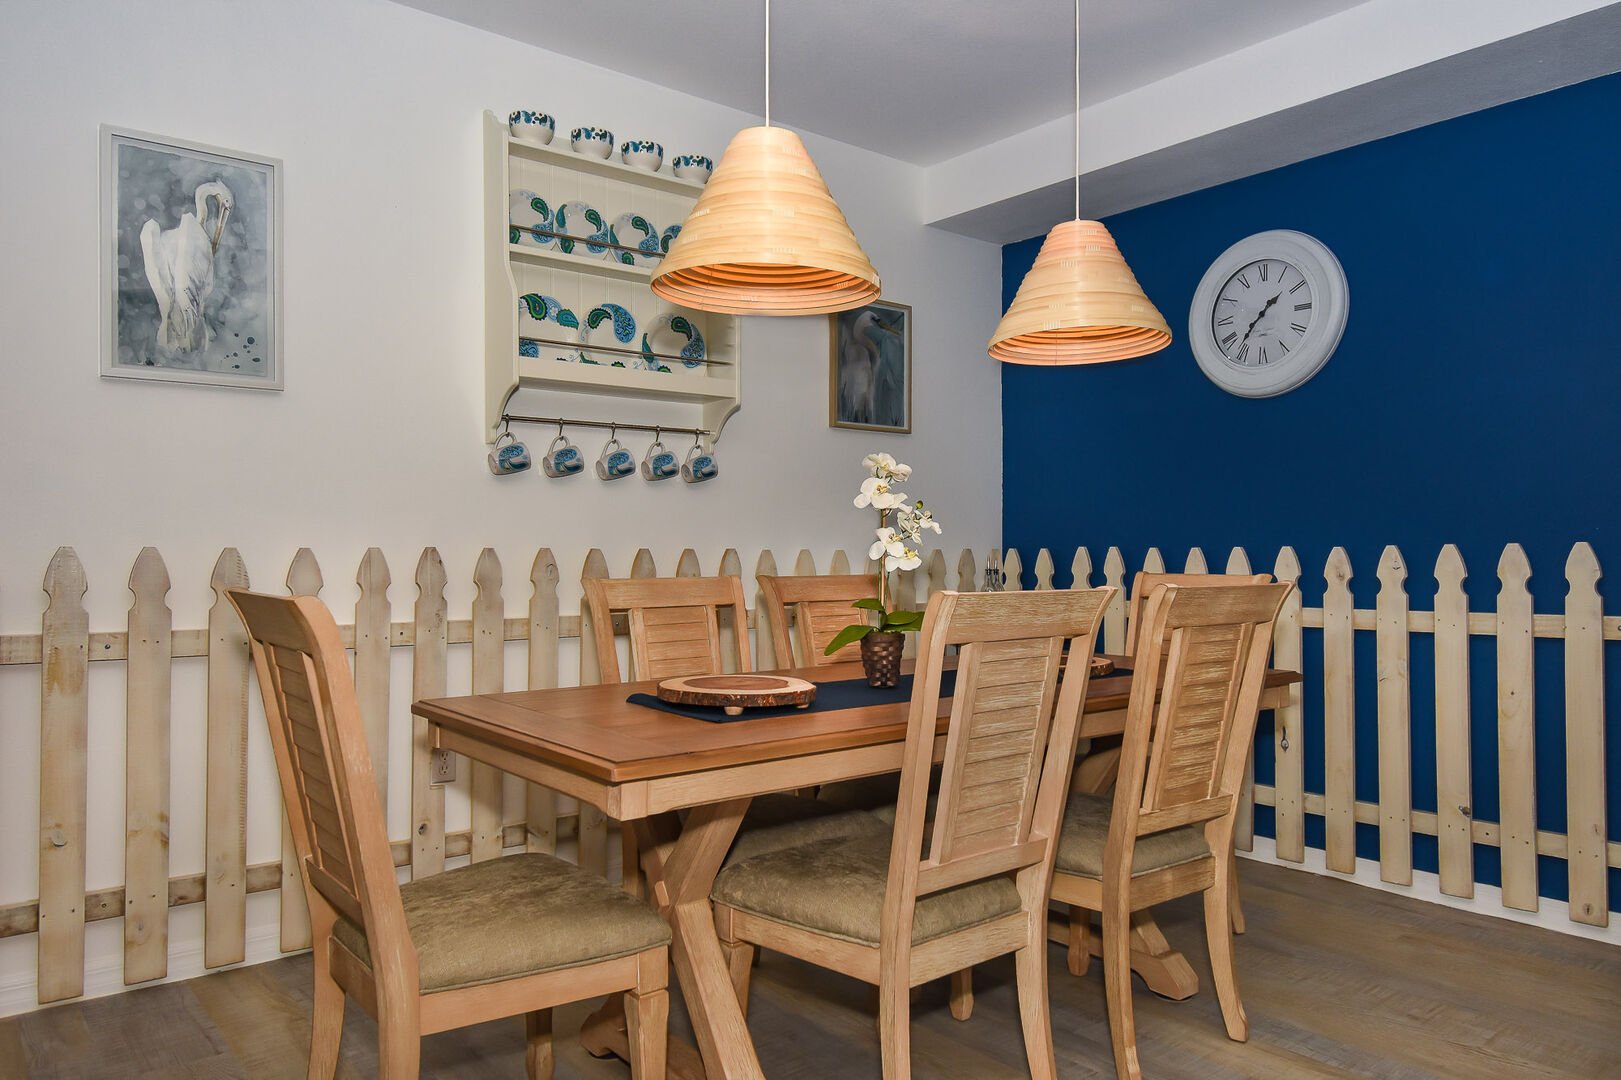 Dining table, chairs, and pendant lamps